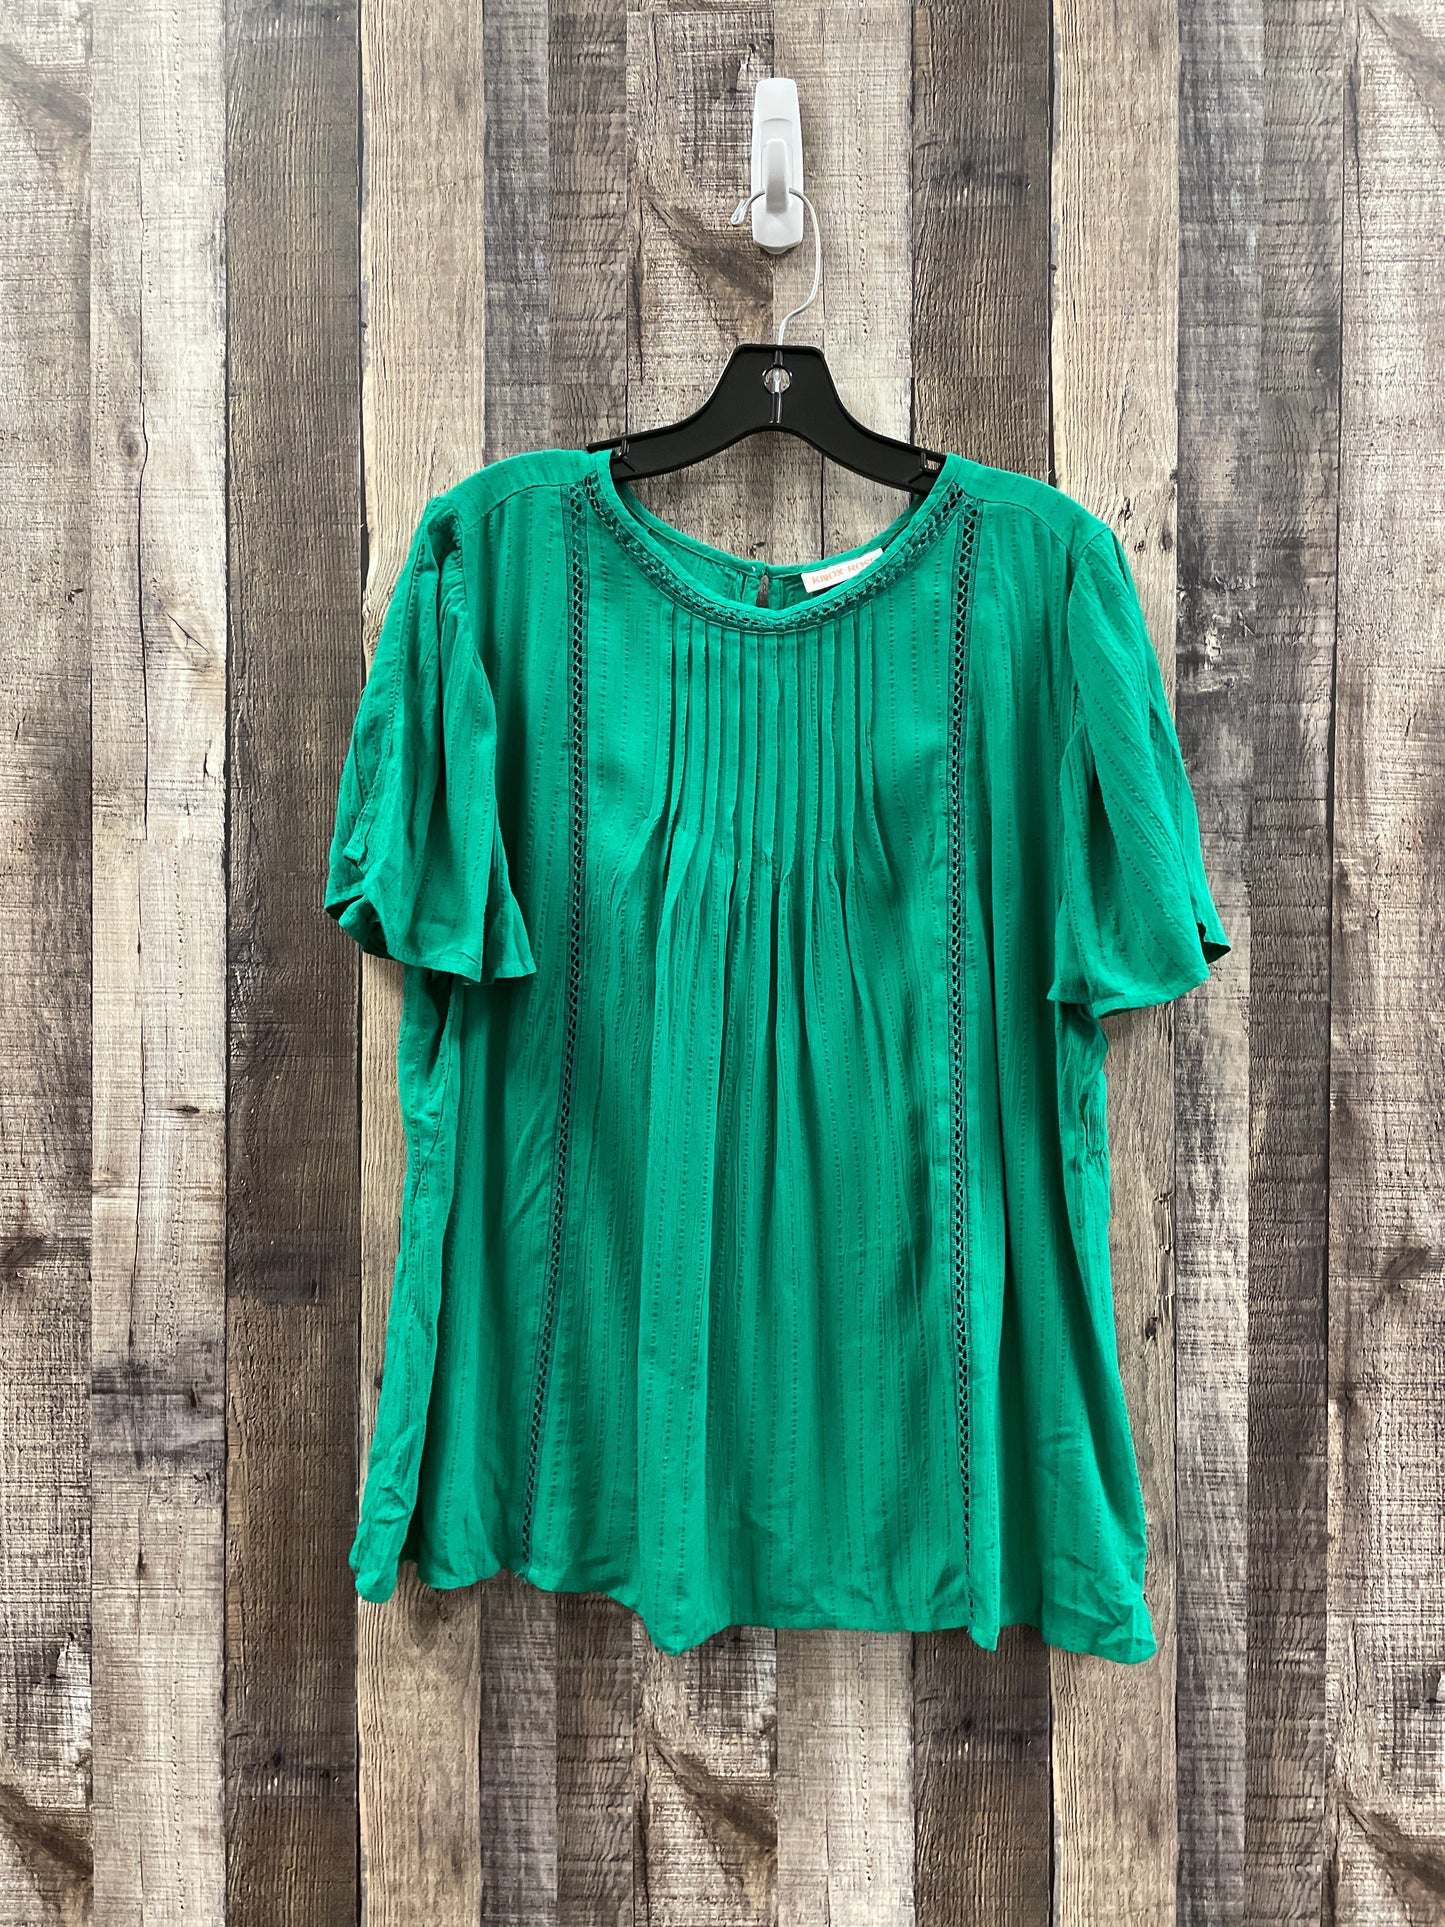 Green Top Short Sleeve Knox Rose, Size M